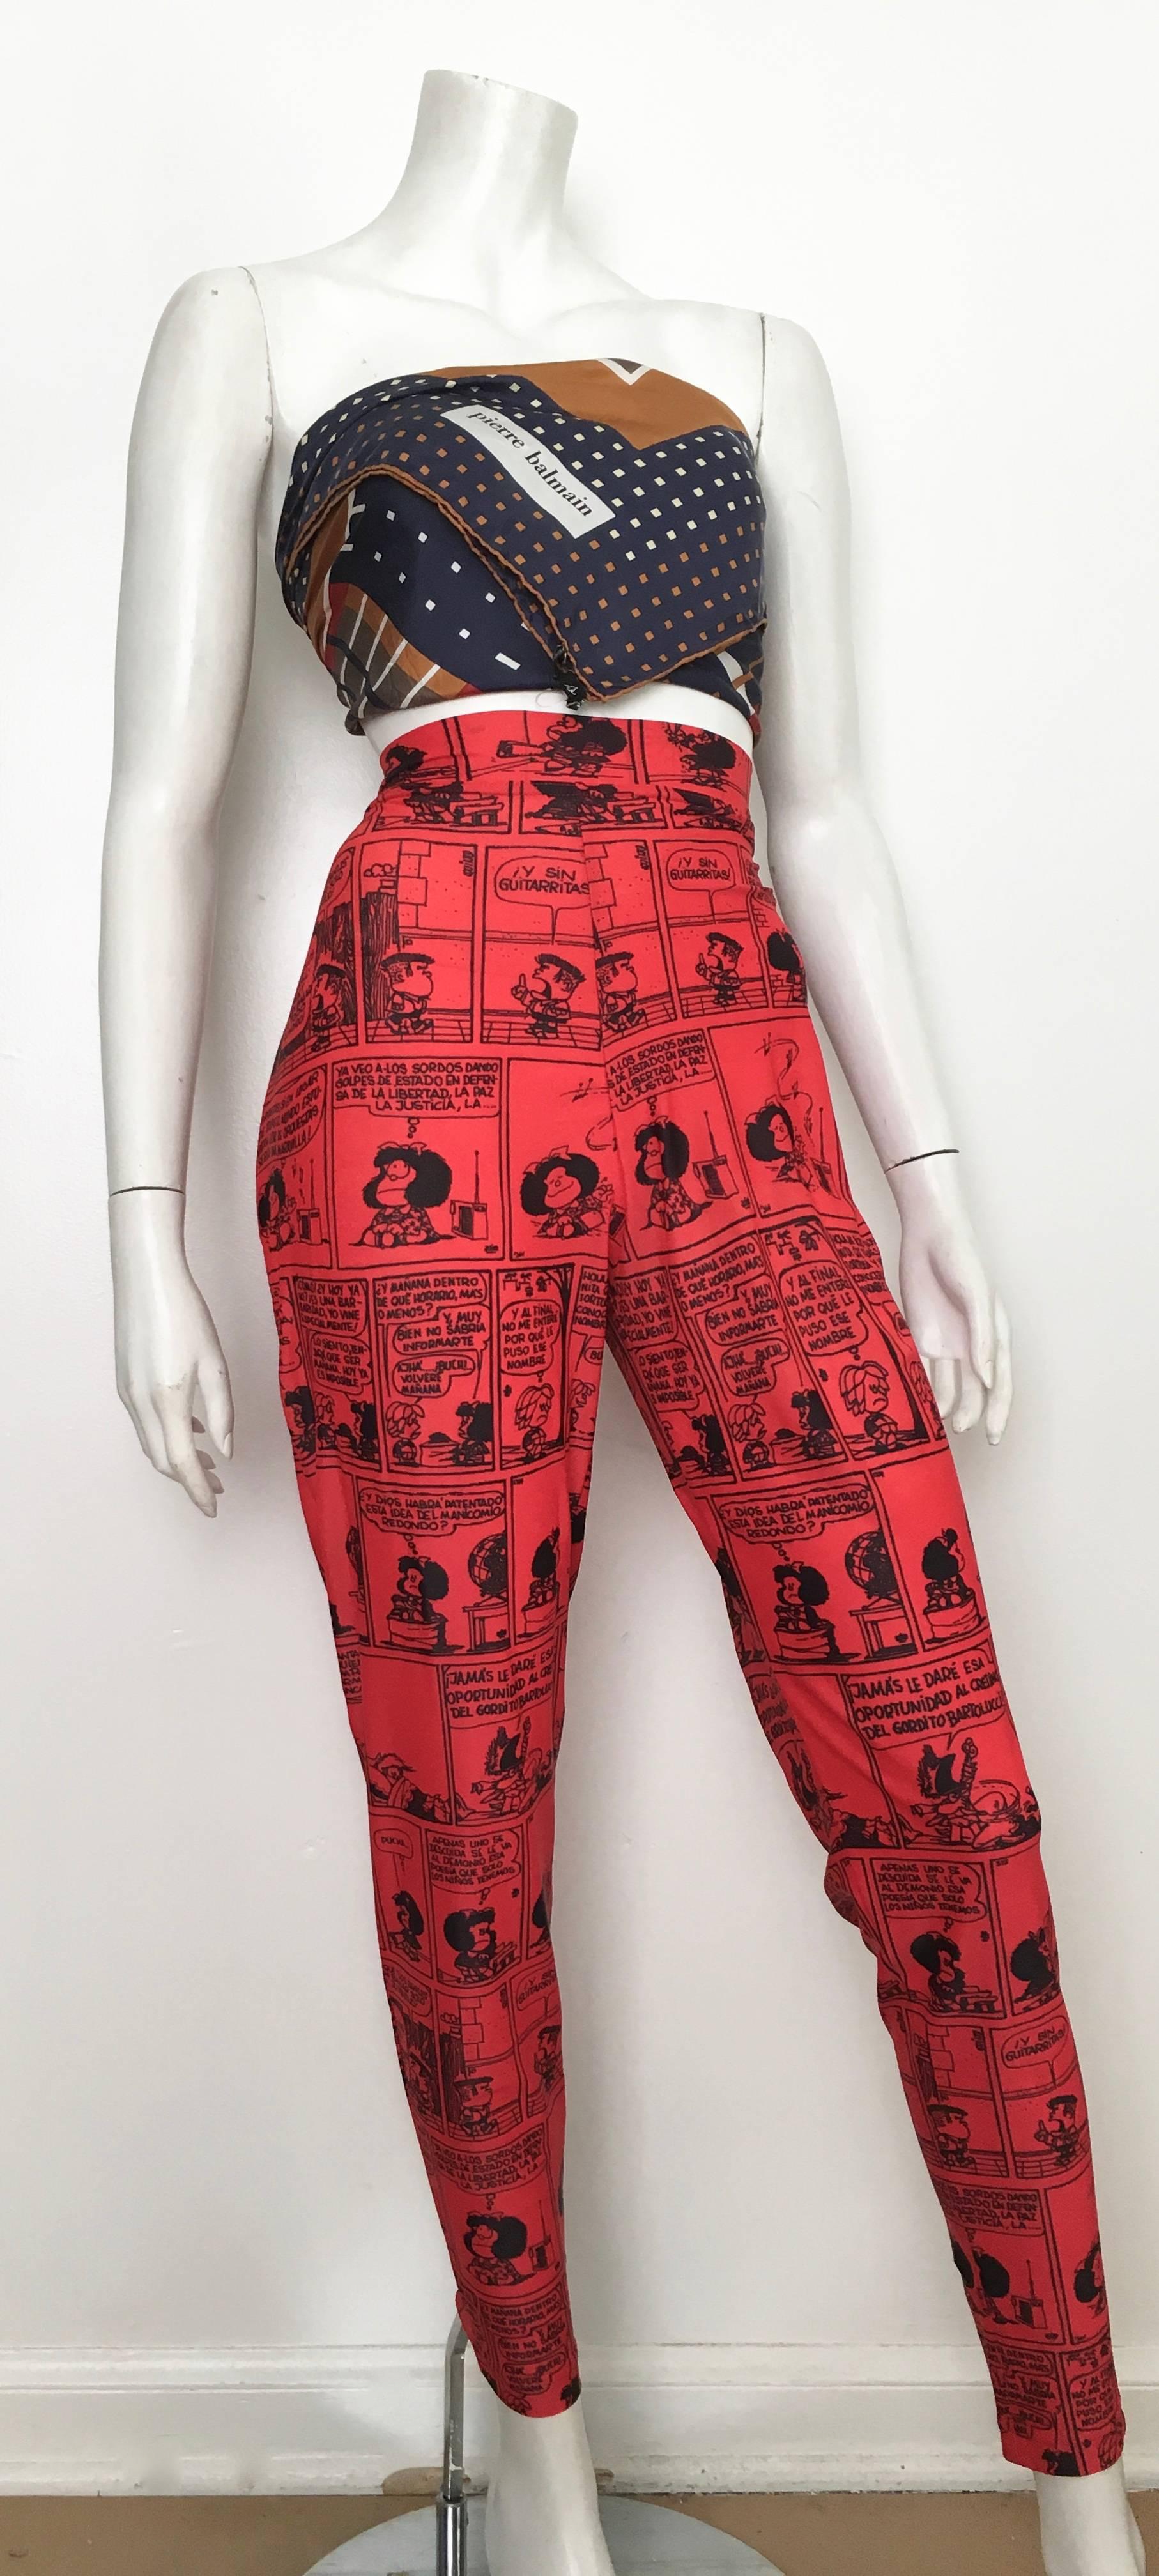 Jean Charles de Castelbajac 1990s cartoon knit stretch pants is a size 40 and fits like a size 6/8. The waist is 30